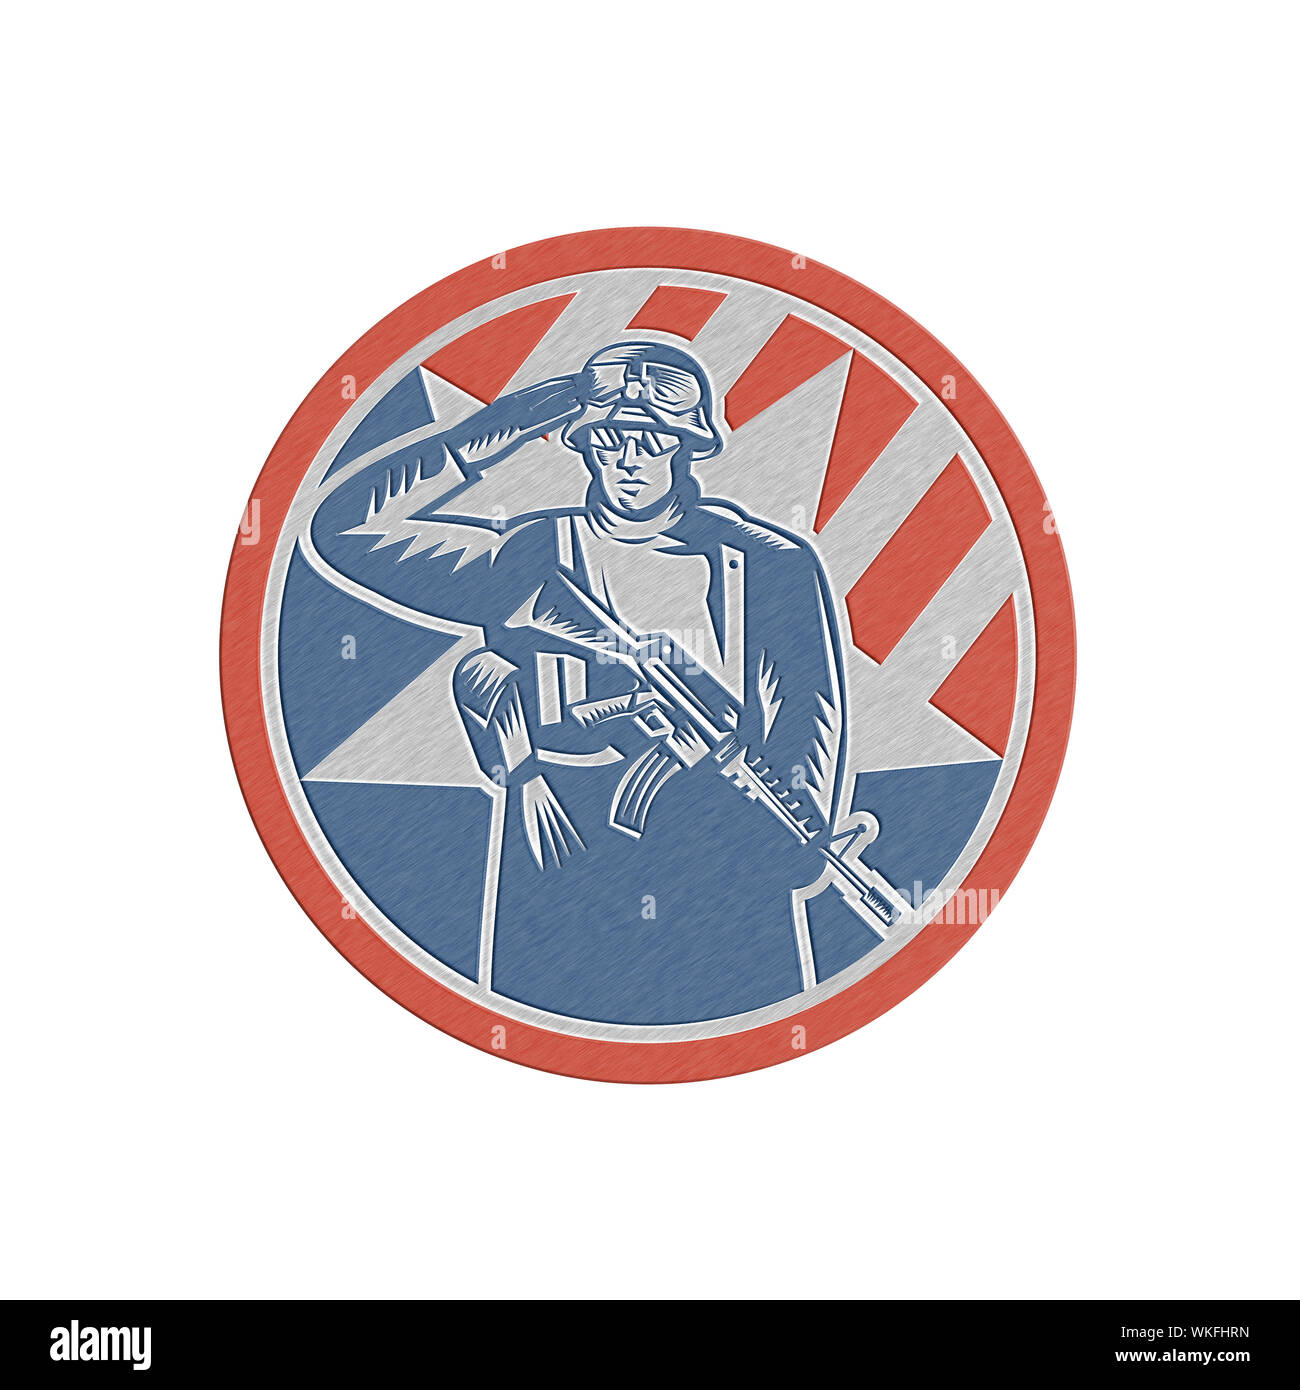 Metallic styled illustration of an American soldier serviceman saluting holding rifle gun facing front inside circle done in retro style. Stock Photo